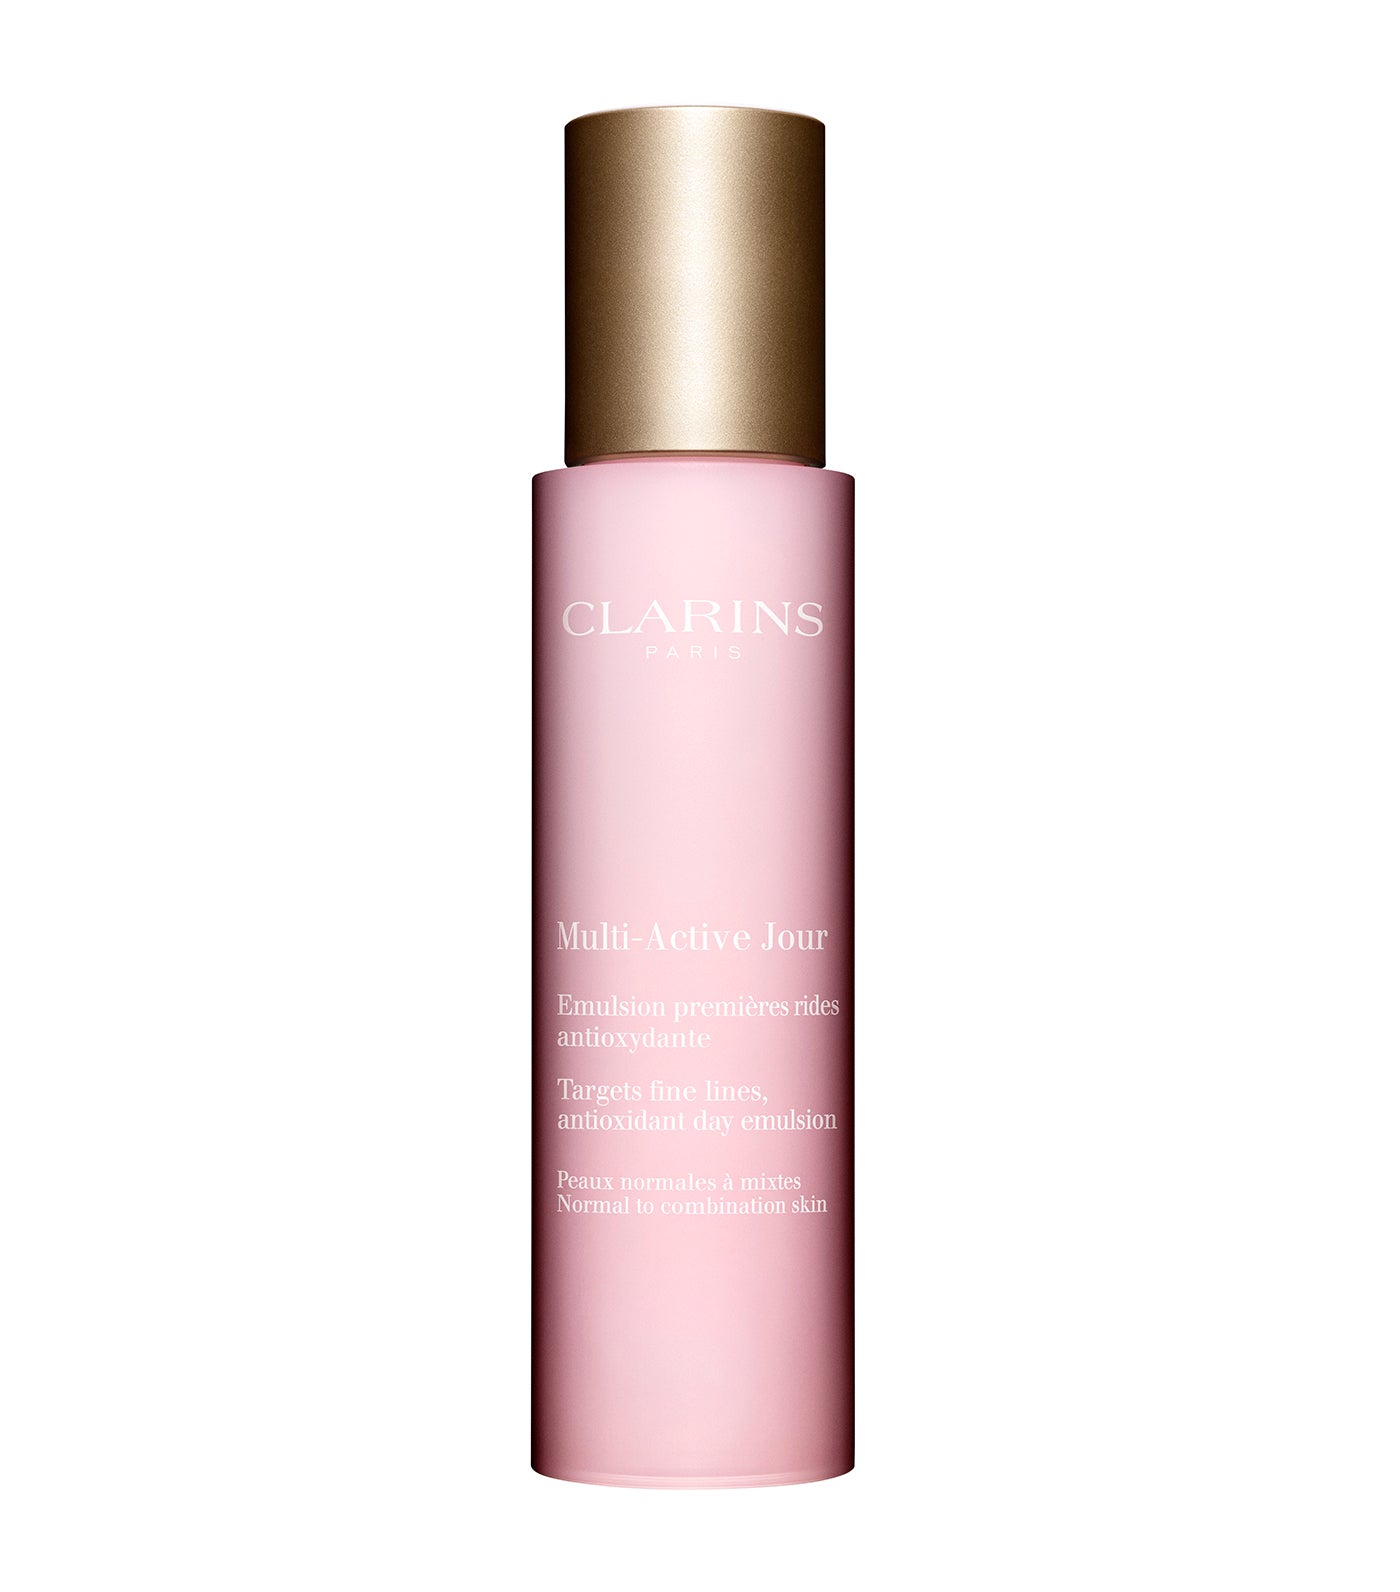 clarins multi-active day emulsion - all skin types